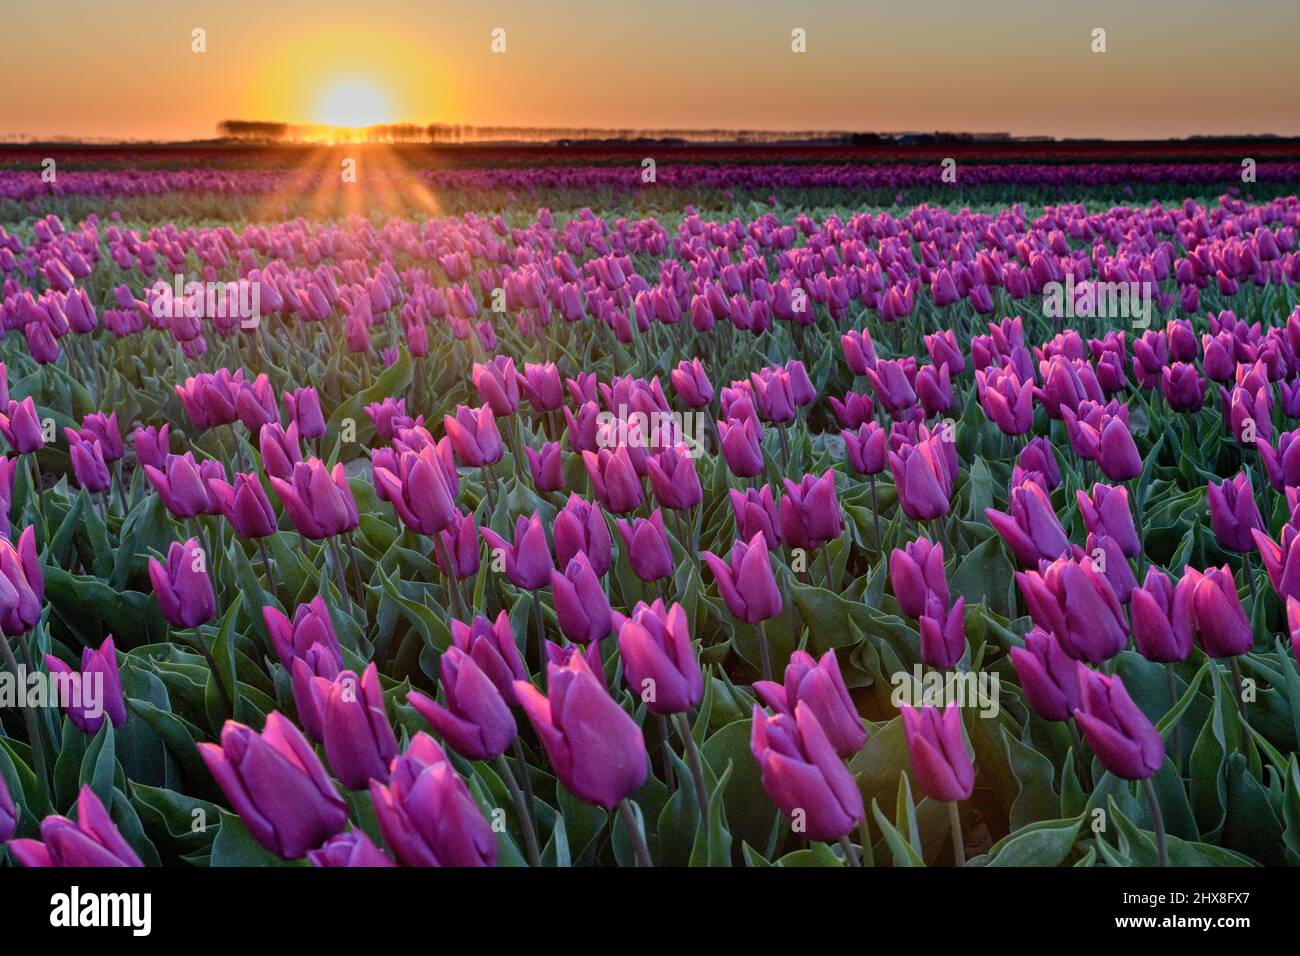 A flower field with purple flowering tulips at Goeree-Overflakkee in the Netherlands during sunset. Stock Photo